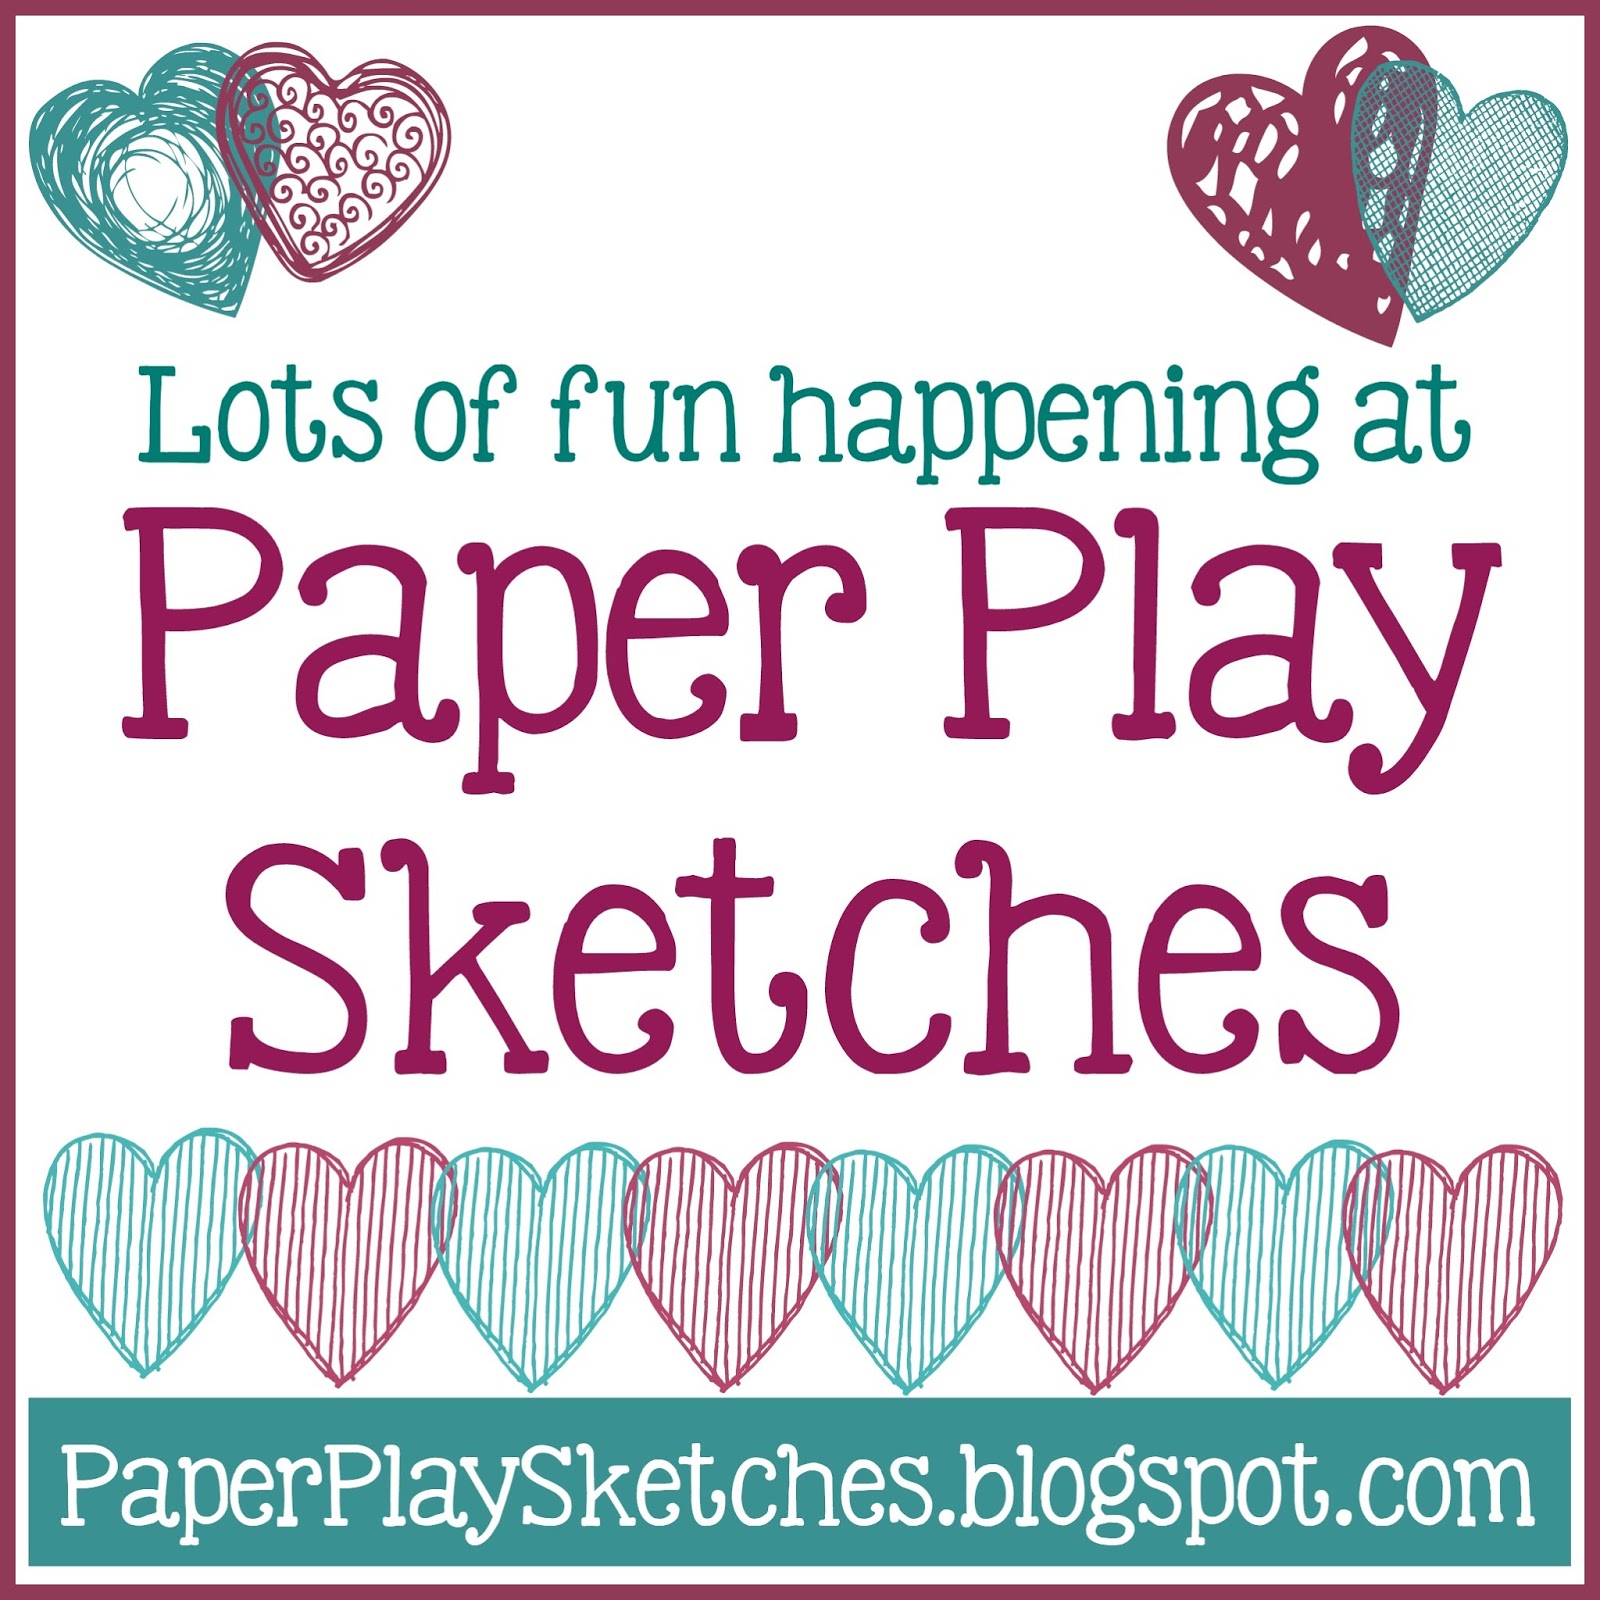 Paper Play Sketches